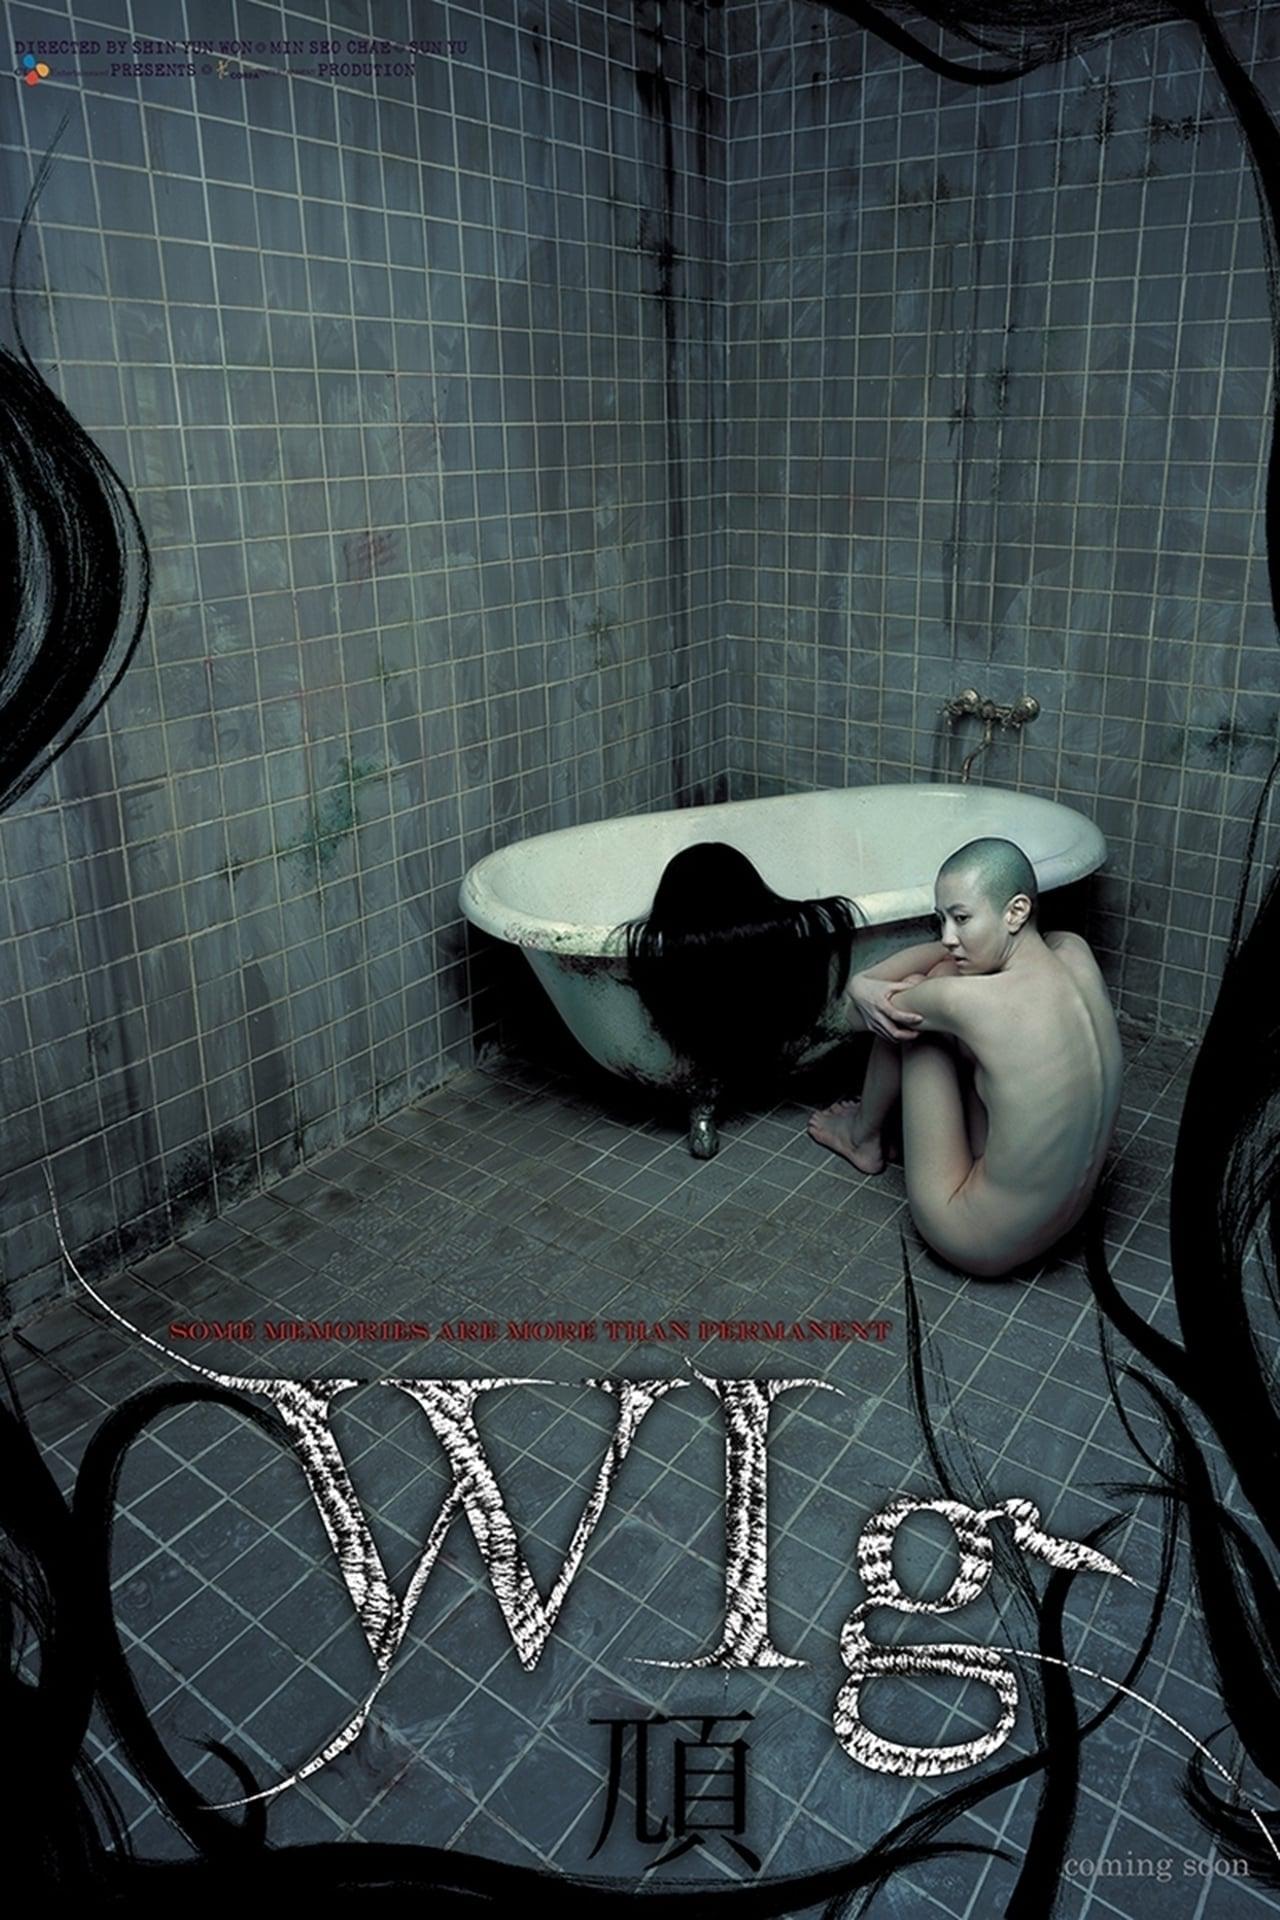 The Wig poster